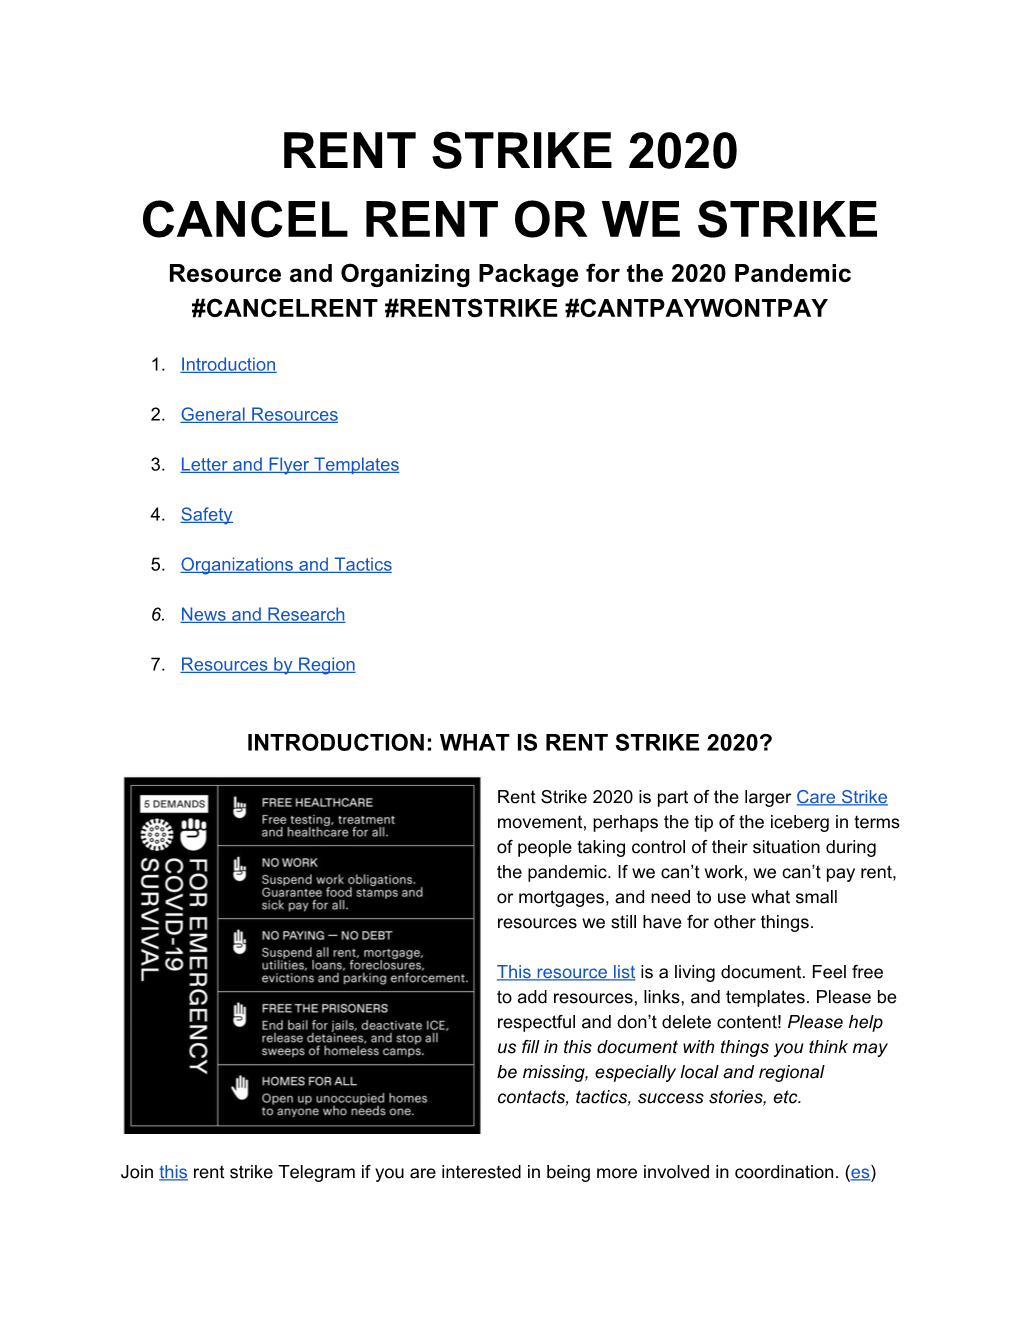 RENT STRIKE 2020 CANCEL RENT OR WE STRIKE Resource and Organizing Package for the 2020 Pandemic #CANCELRENT #RENTSTRIKE #CANTPAYWONTPAY